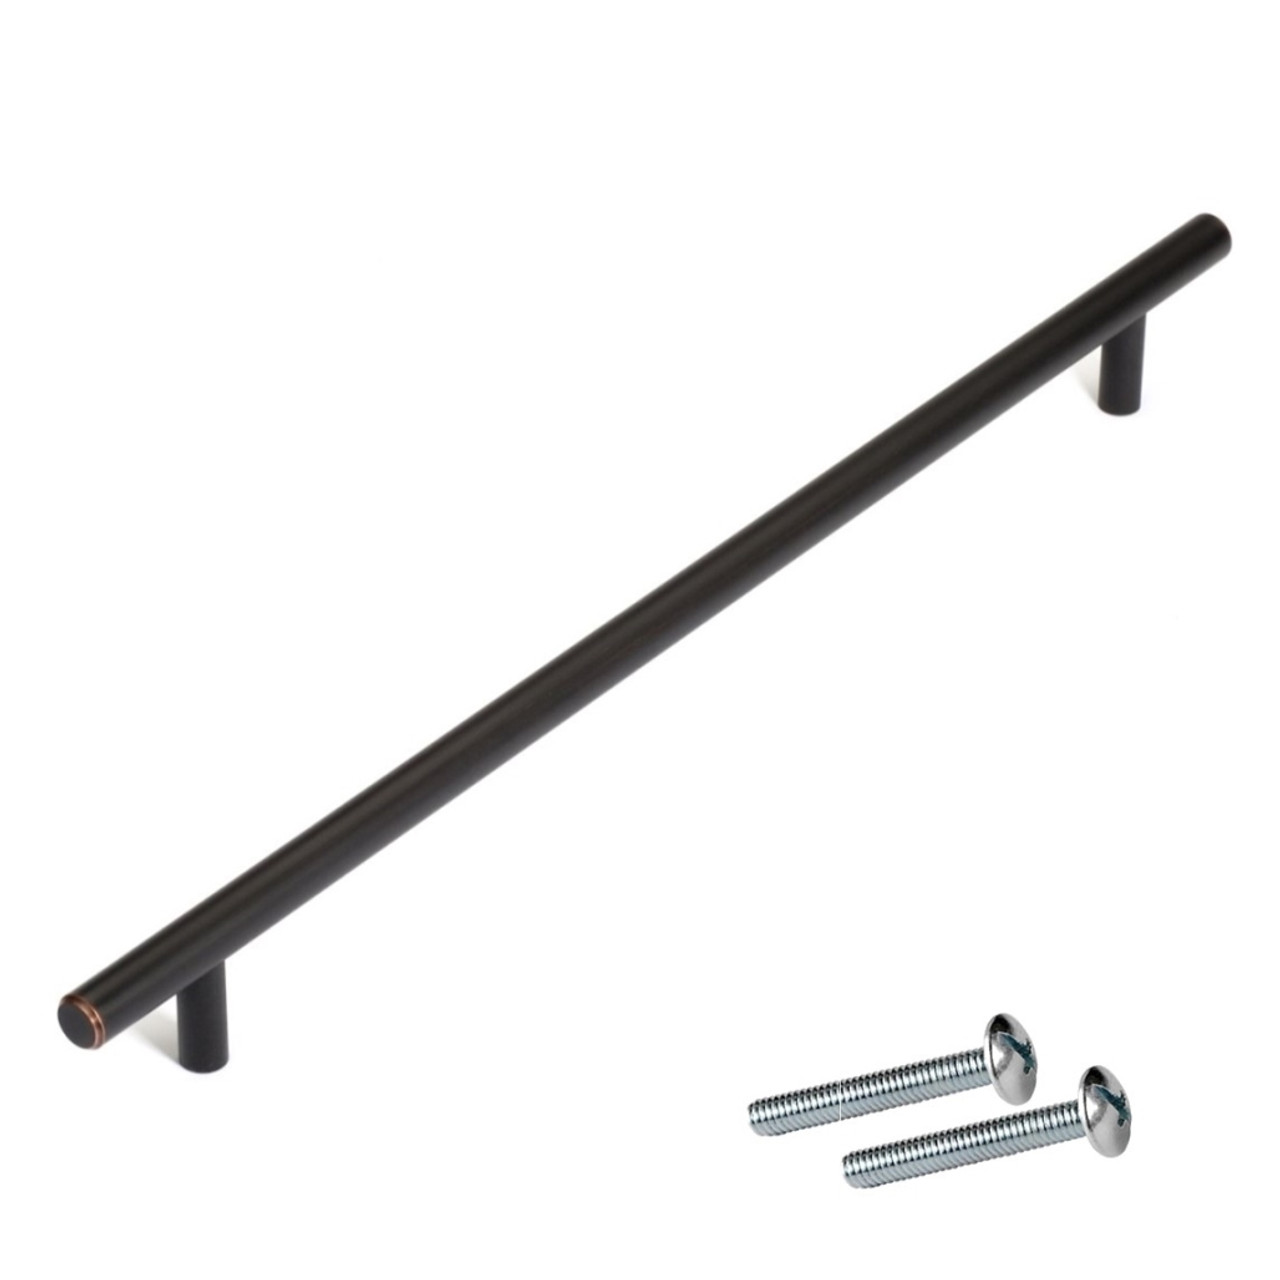 Dynasty Hardware P-151225-ORB European Bar Style Cabinet Hardware Pulls 15" Long Oil Rubbed Bronze